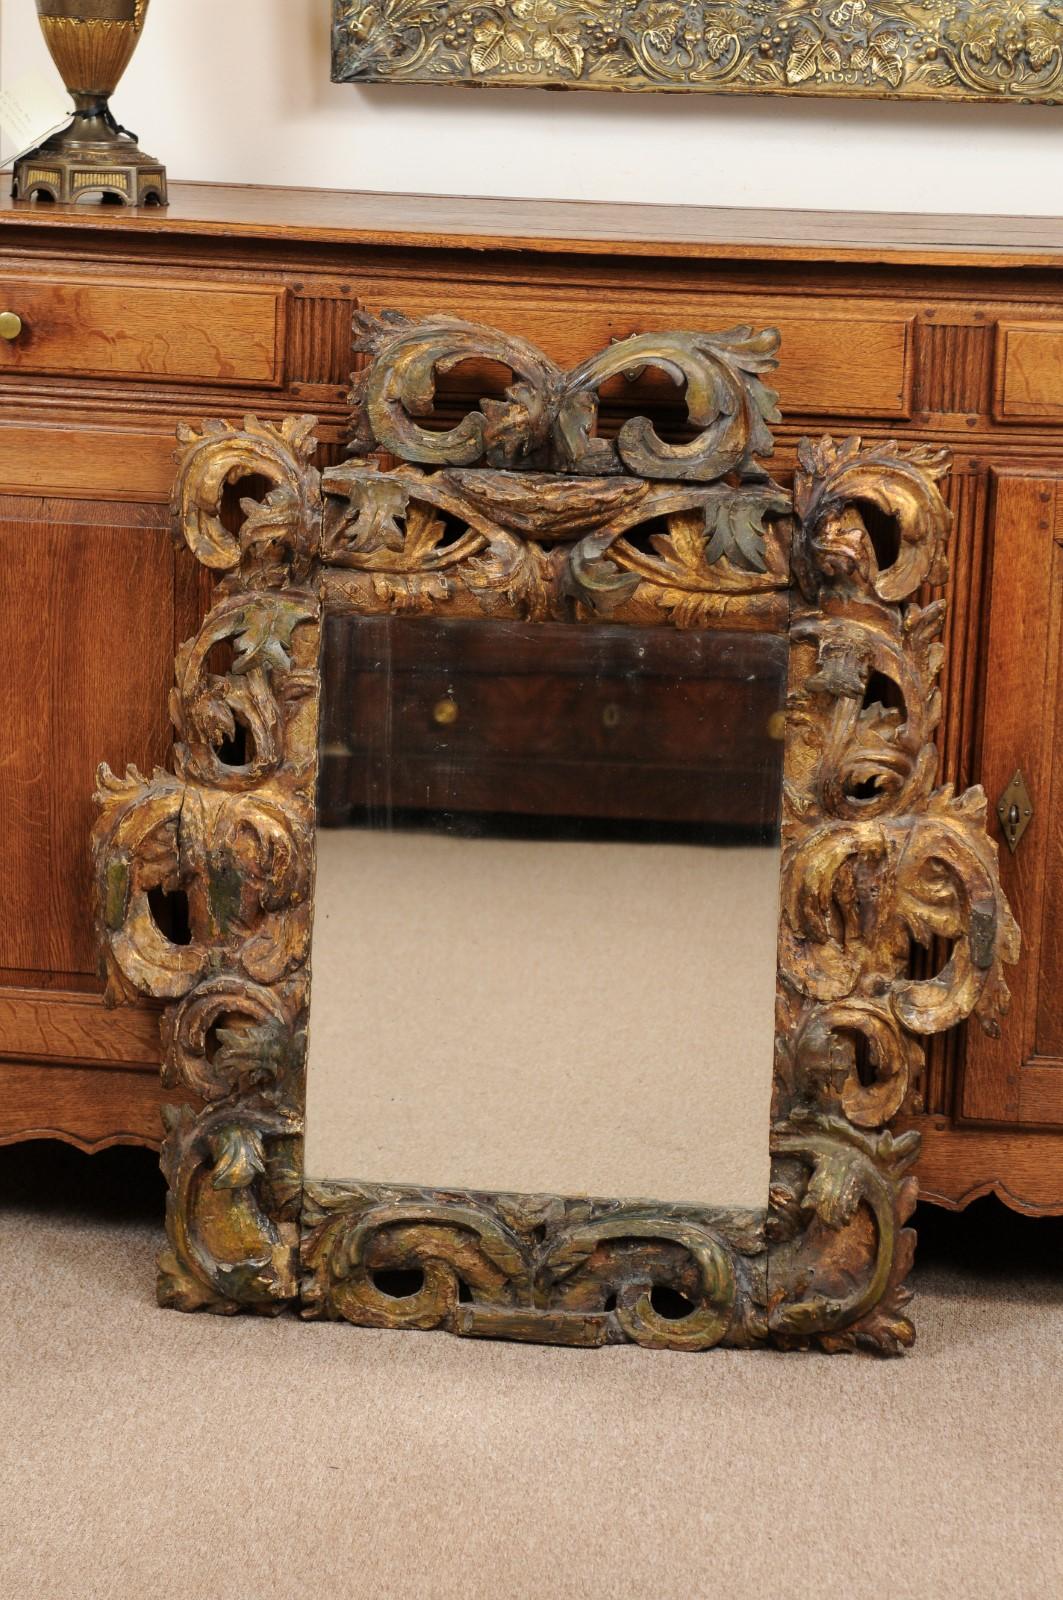 Rococo Period giltwood & green painted mirror with acanthus leaf design, Italy Early 18th Century.